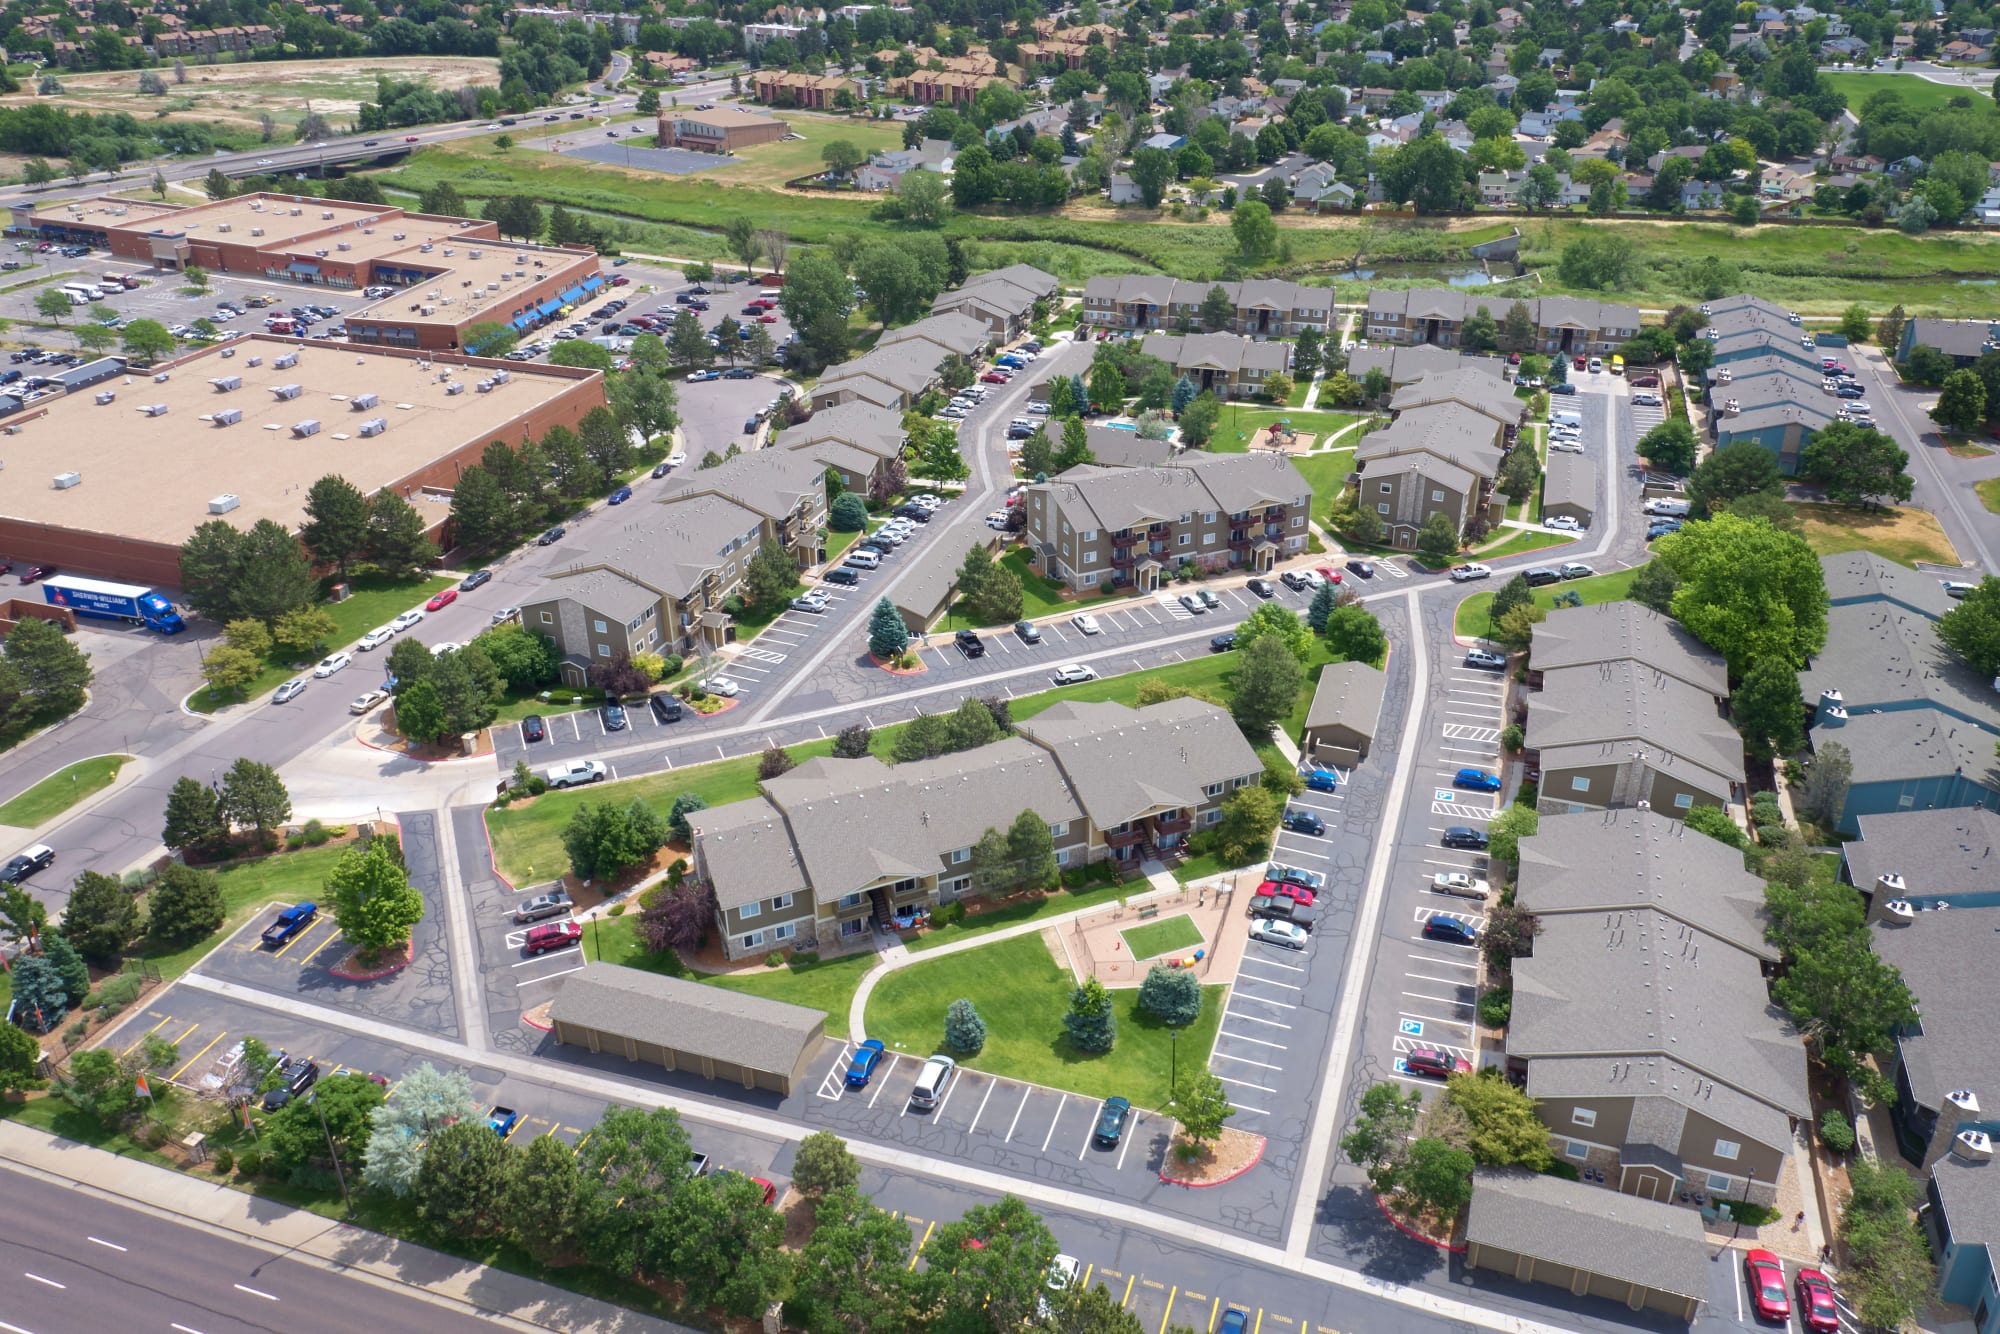 An aerial view of Crossroads at City Center Apartments in Aurora, Colorado